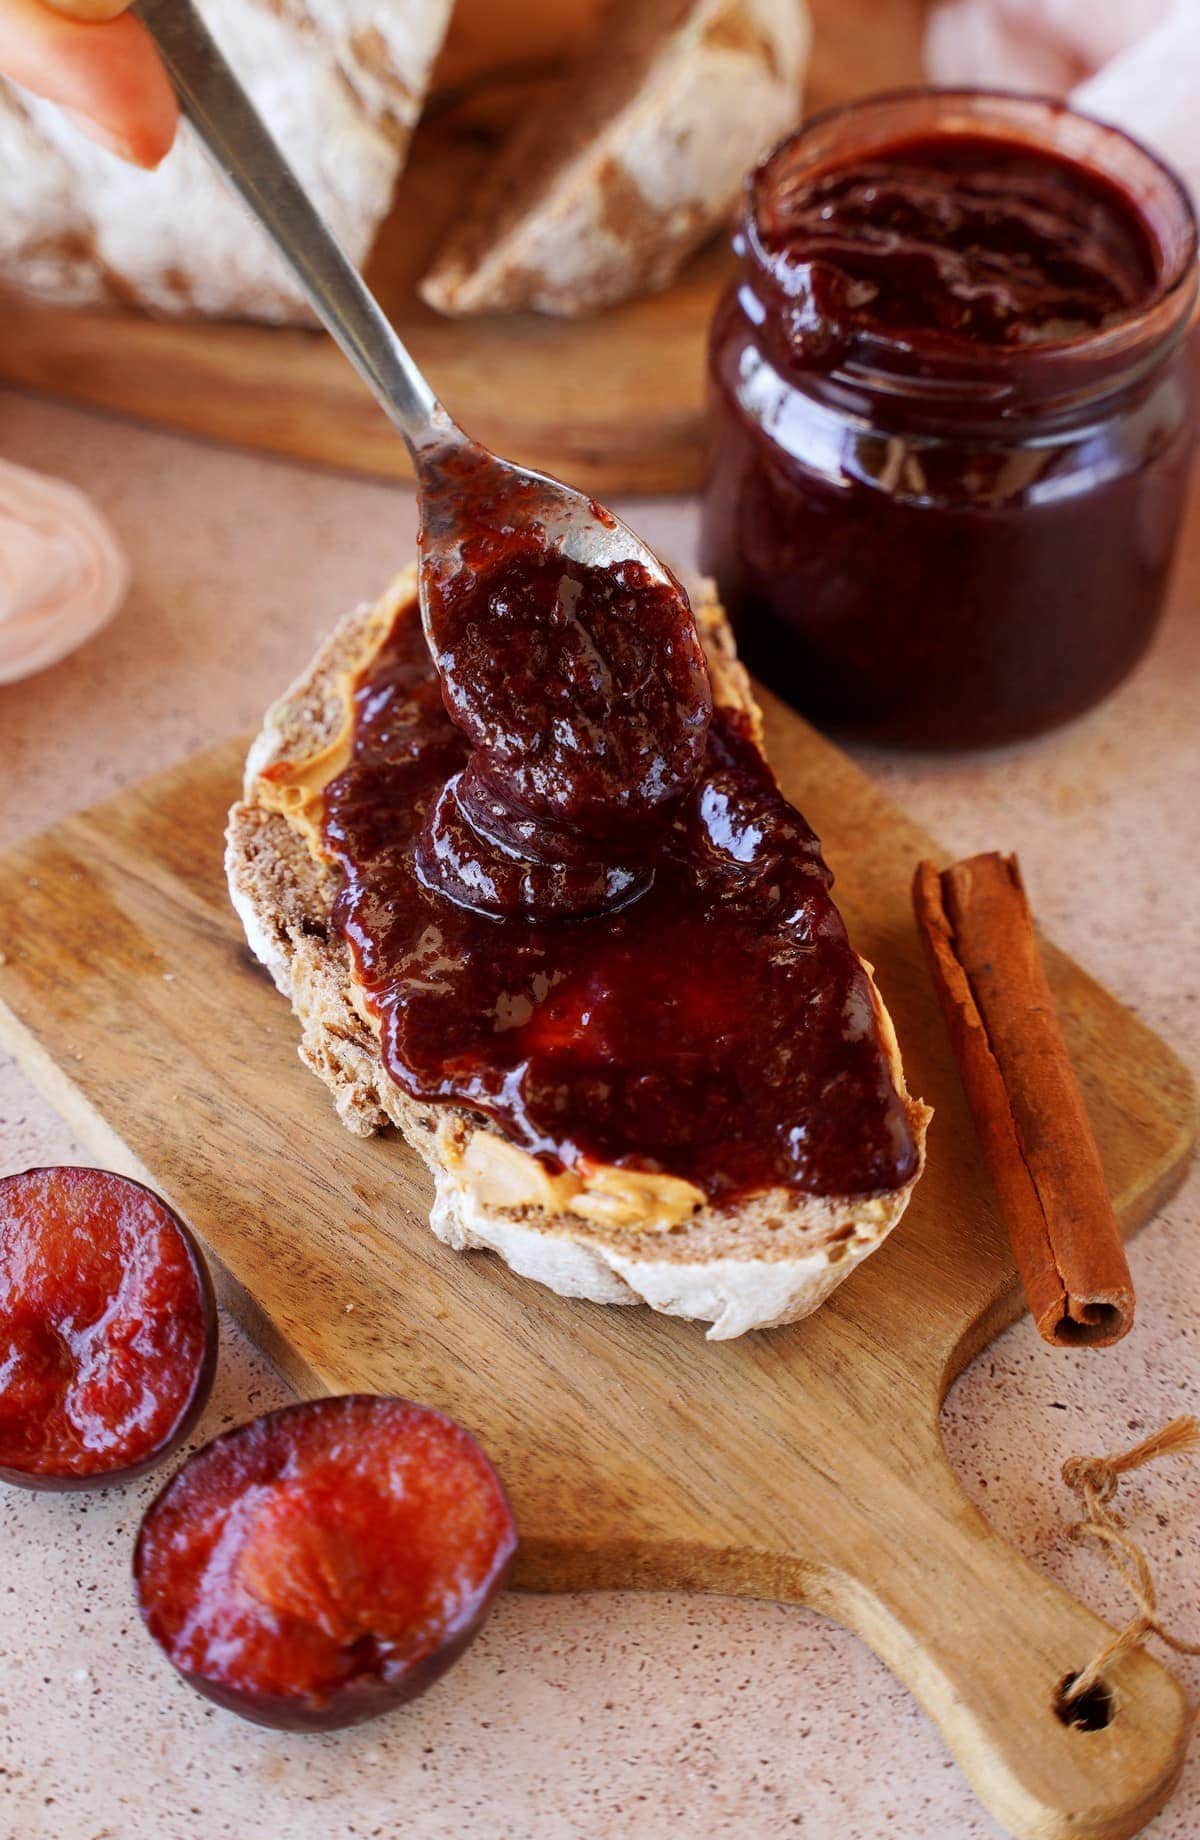 putting plum jam on bread with spoon